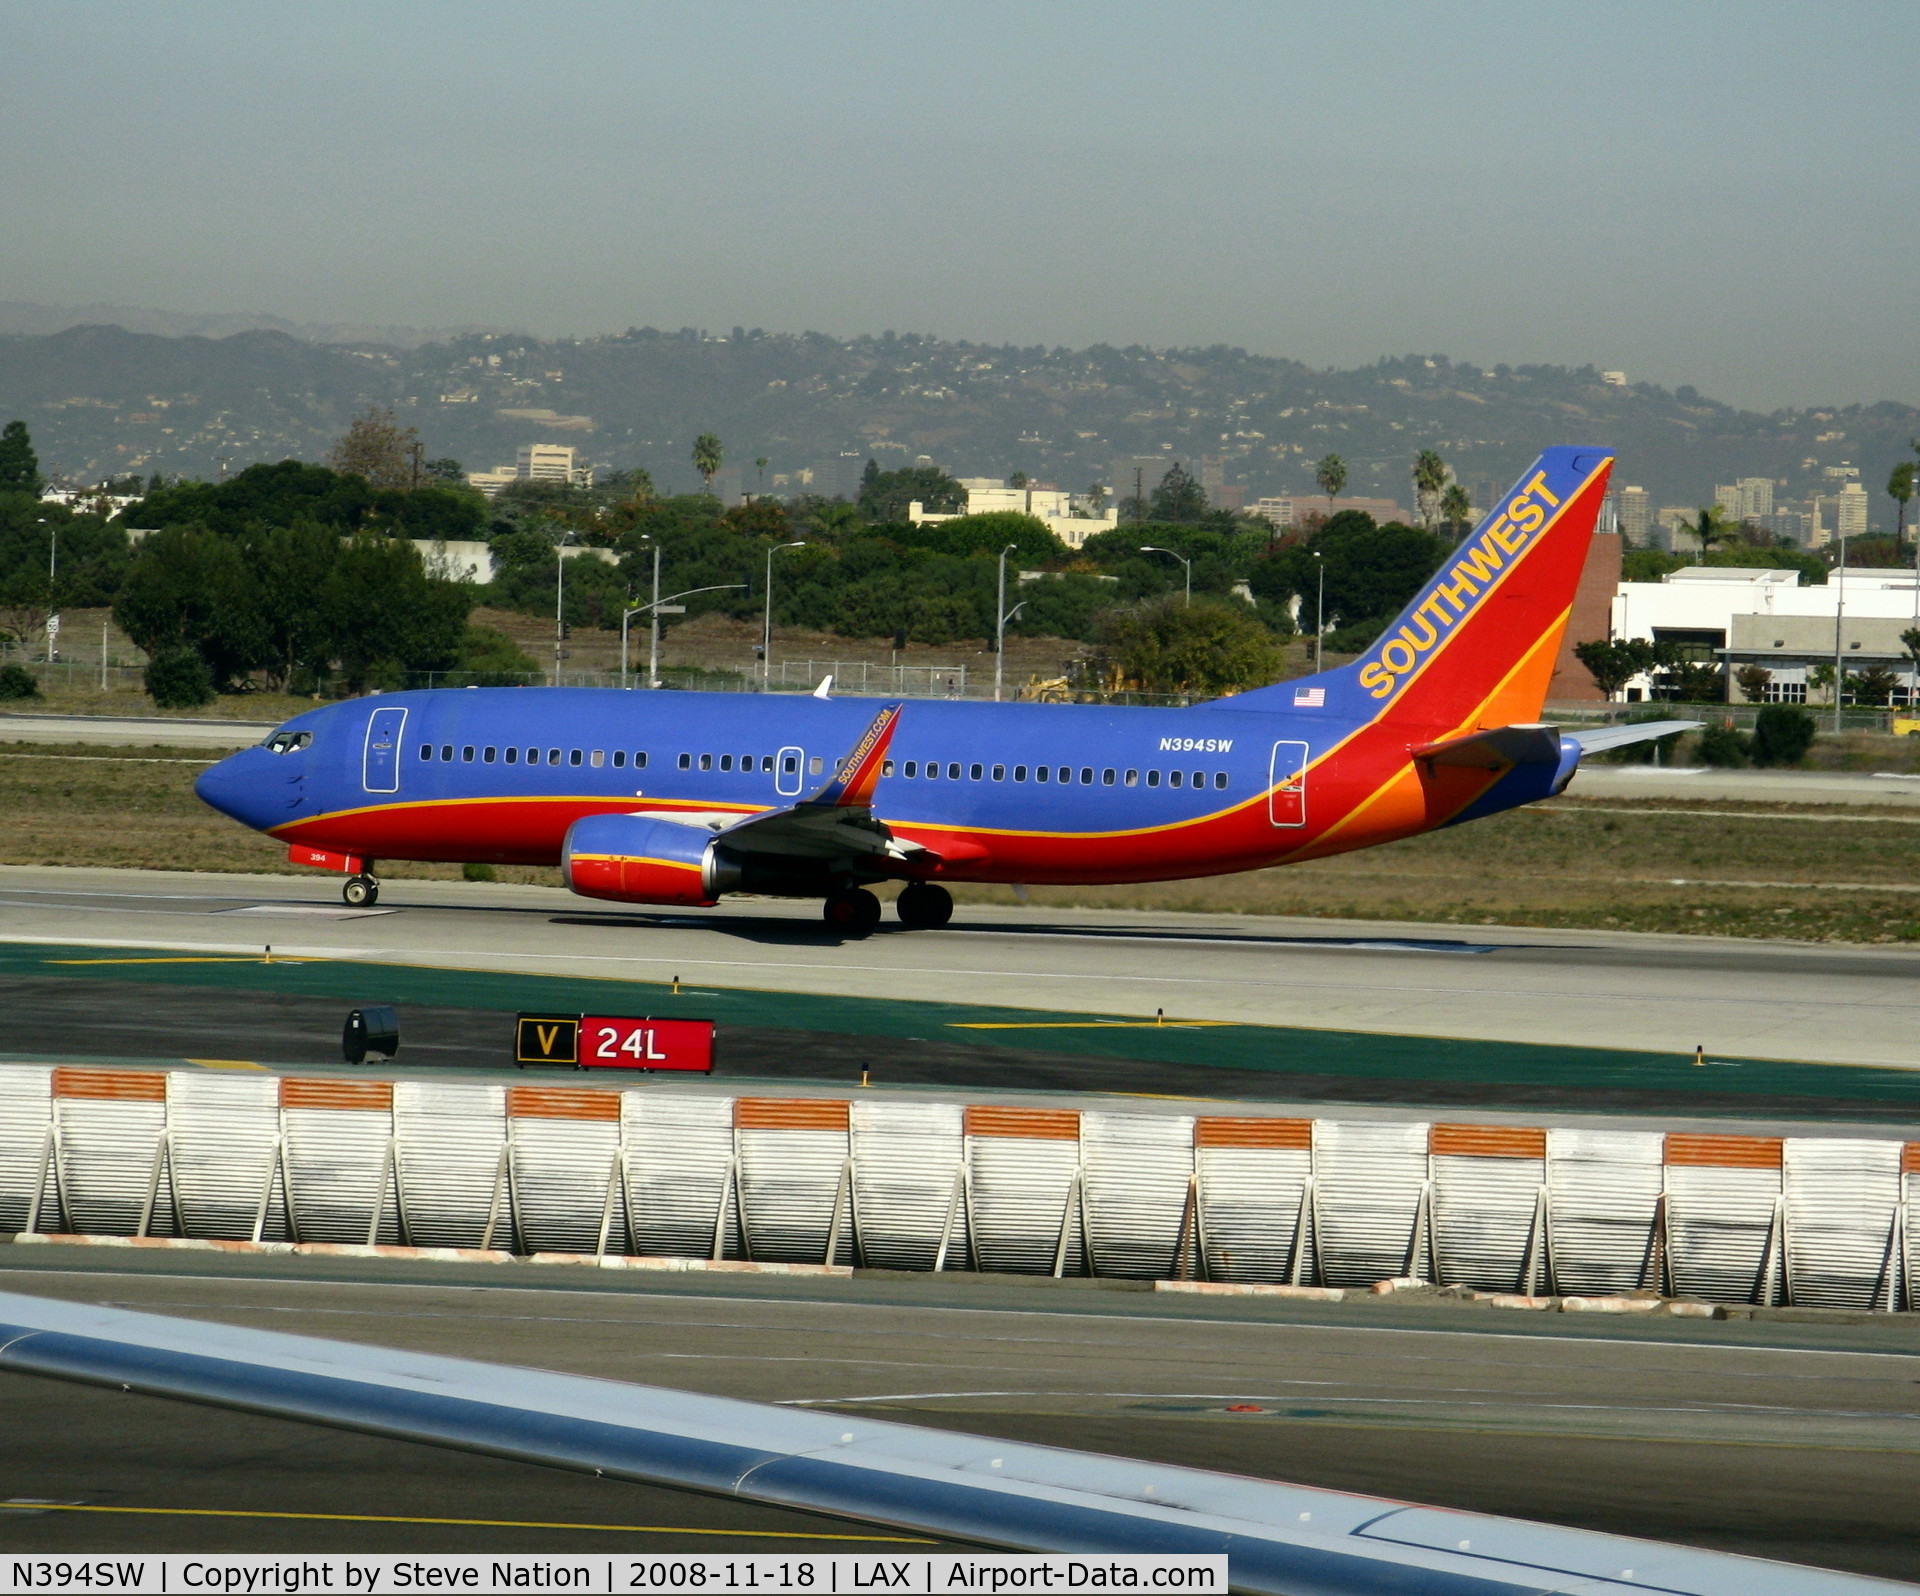 N394SW, 1994 Boeing 737-3H4 C/N 27380, Southwest 1994 Boeing 737-3H4 in new colors with winglets